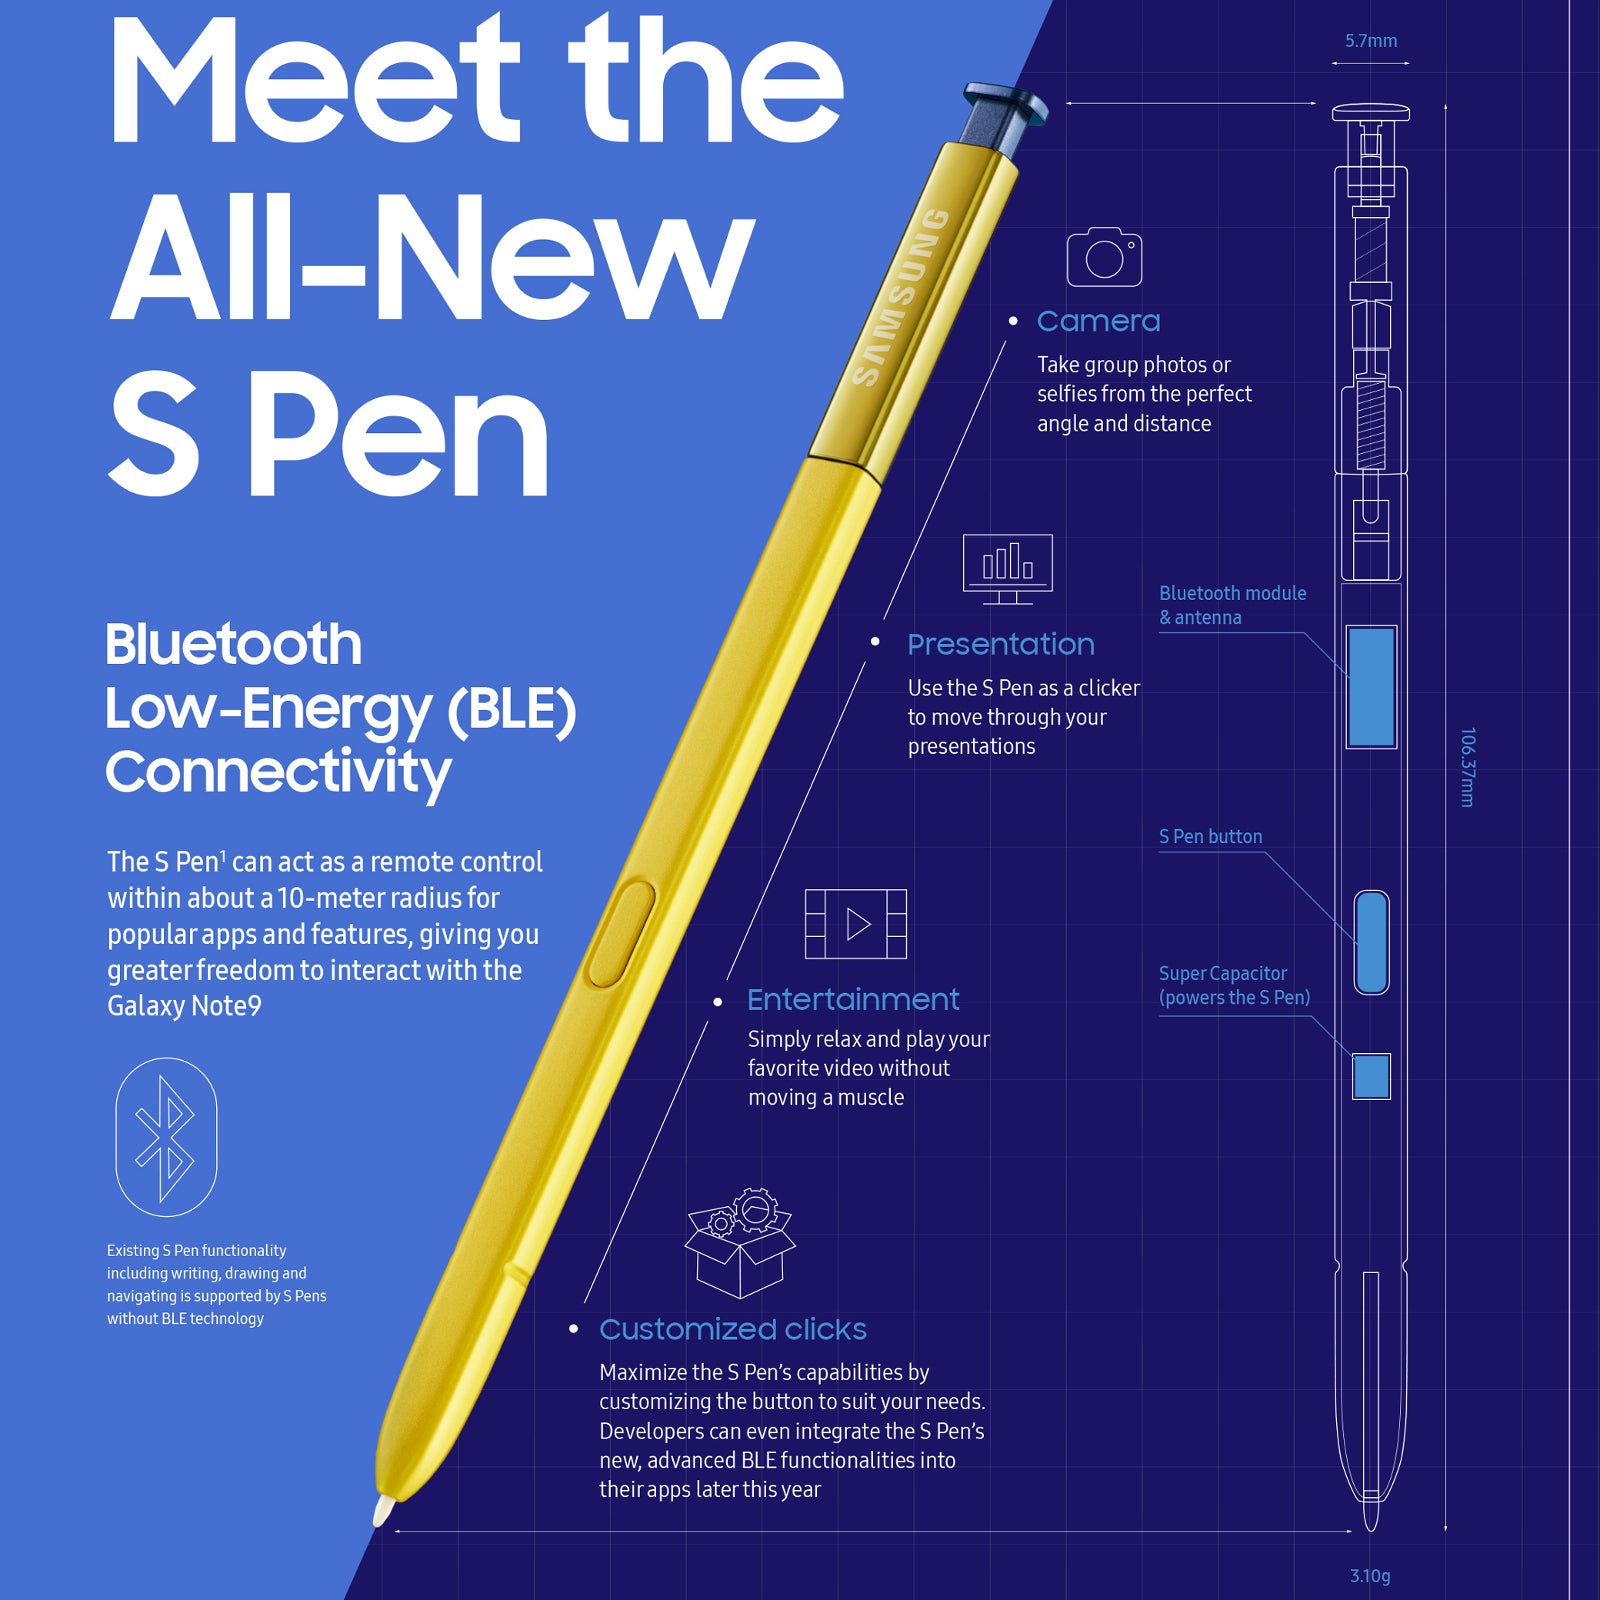 A Samsung infographic highlighting the key features of the new S Pen - The Galaxy Note 9 S Pen has a clever rapid-charging "battery" with one tiny flaw